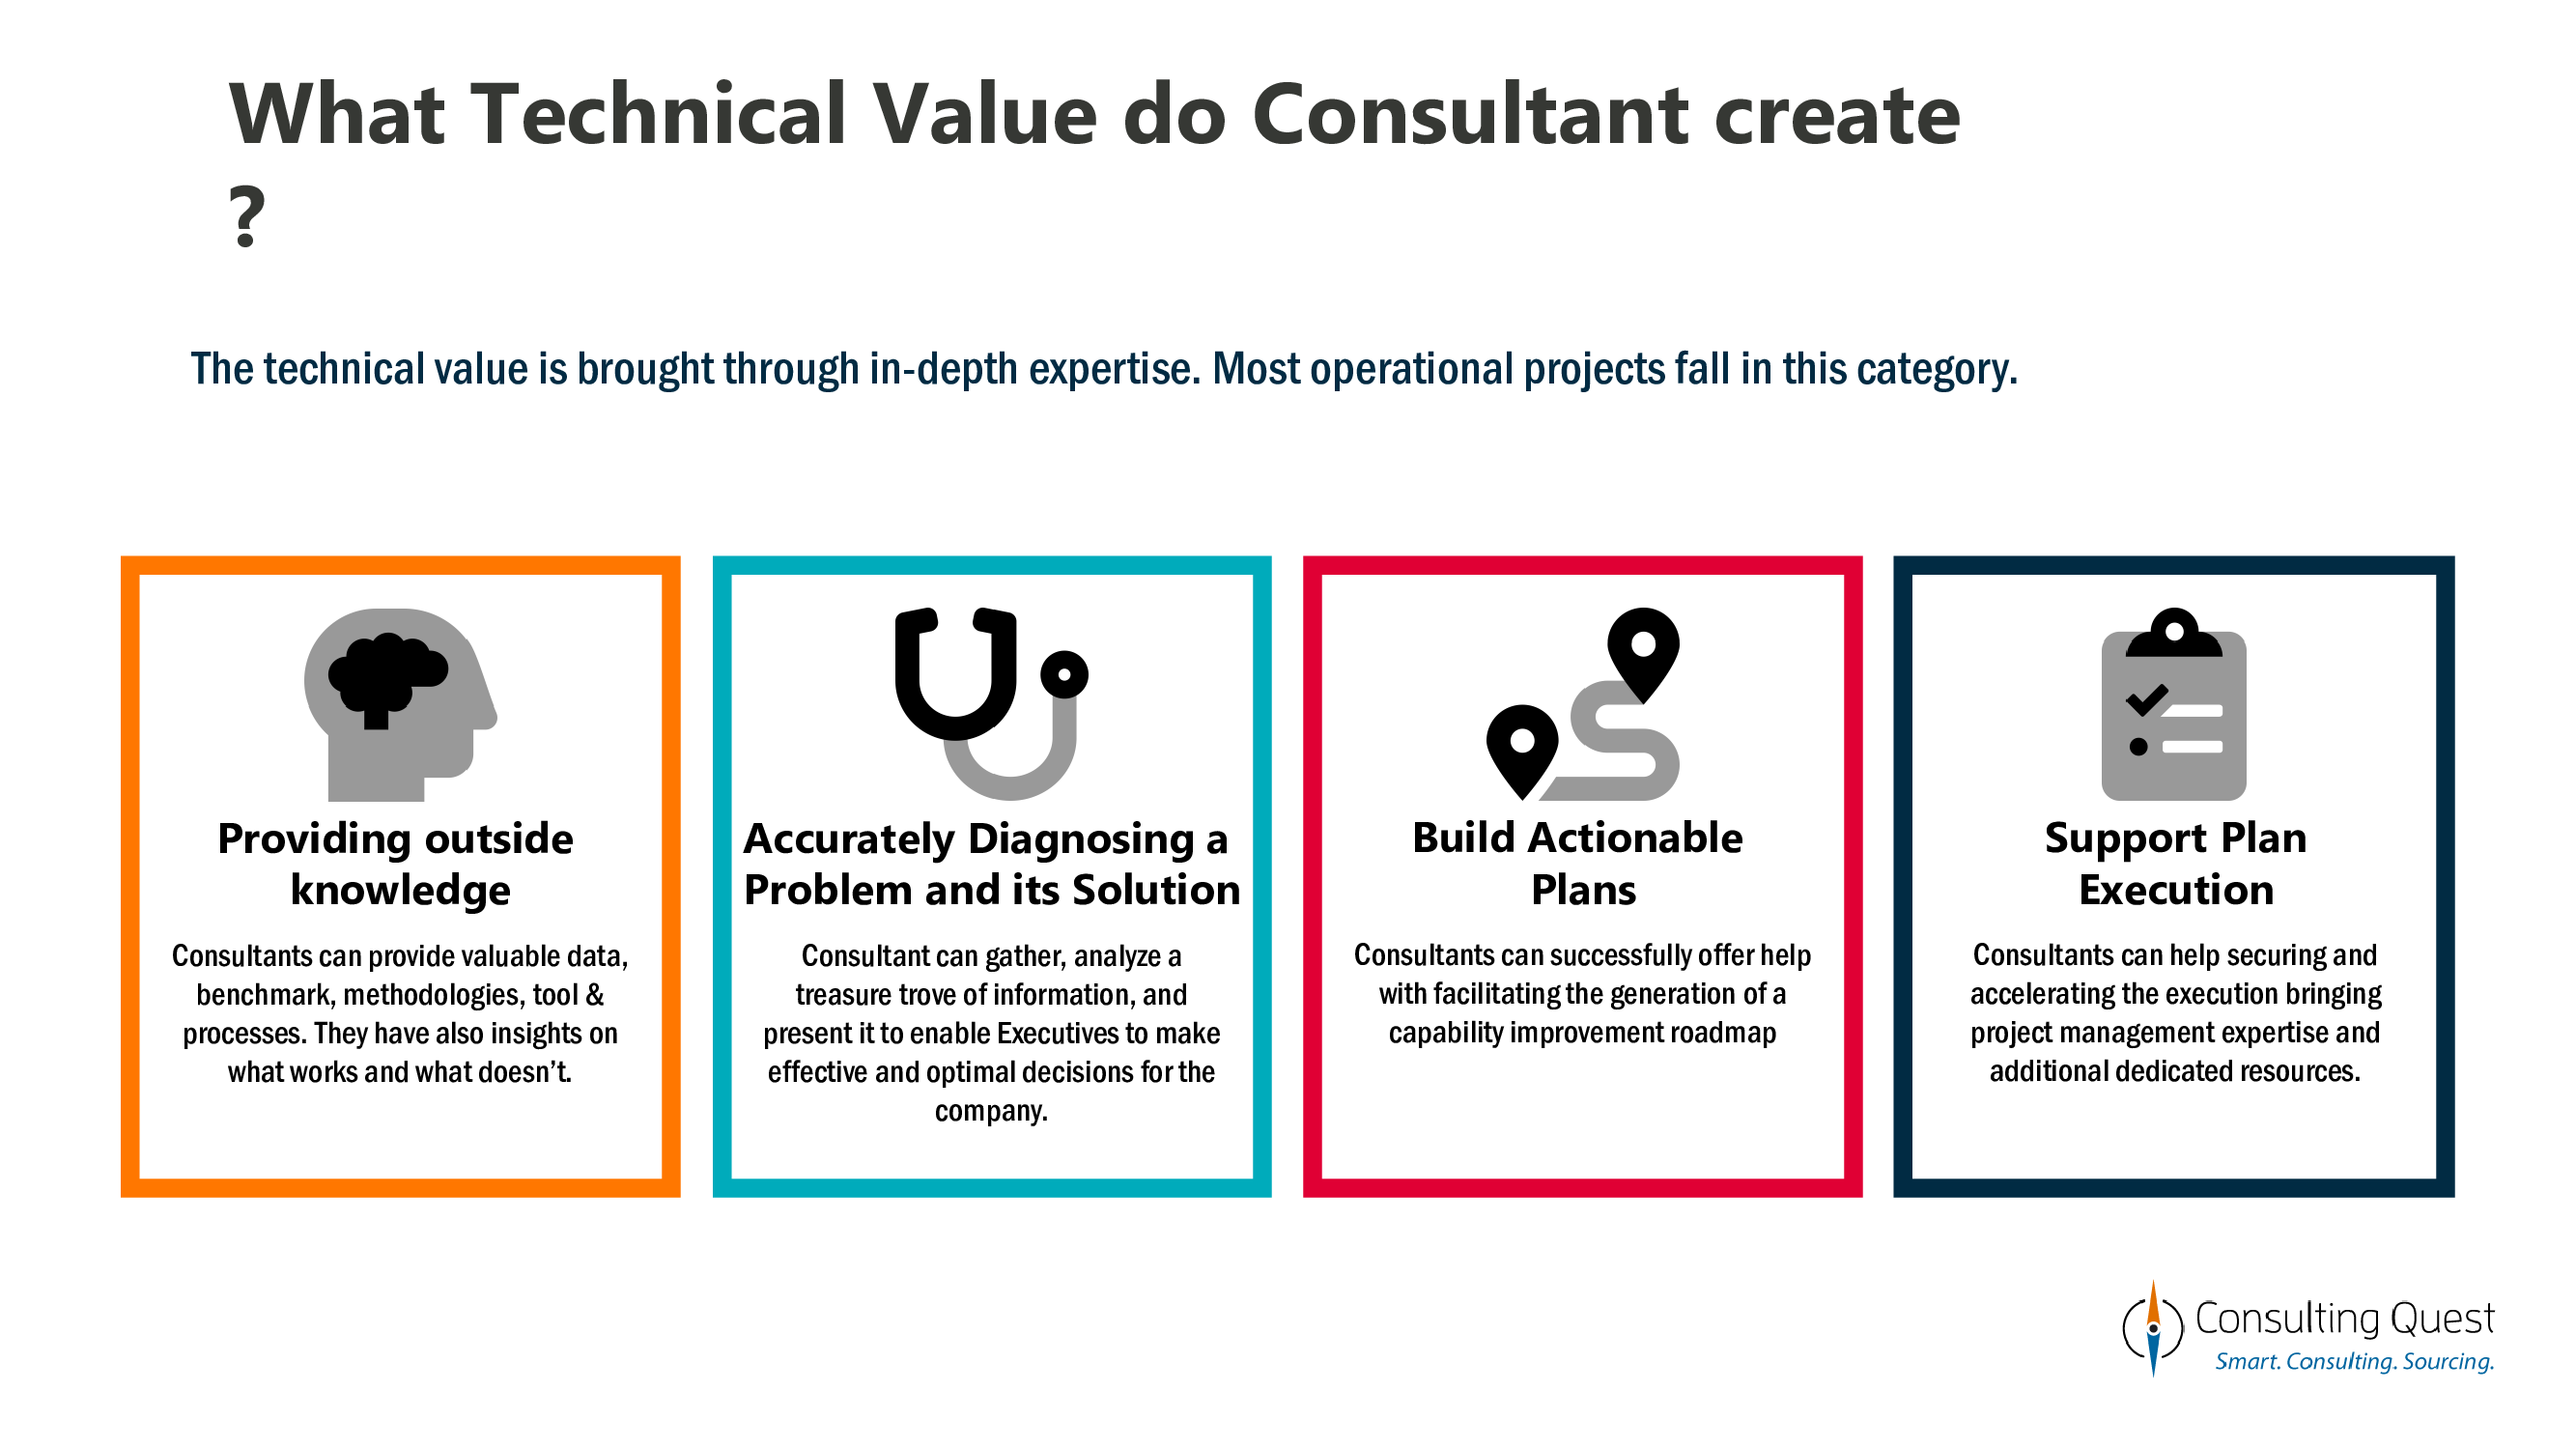 Technical value created by consultants